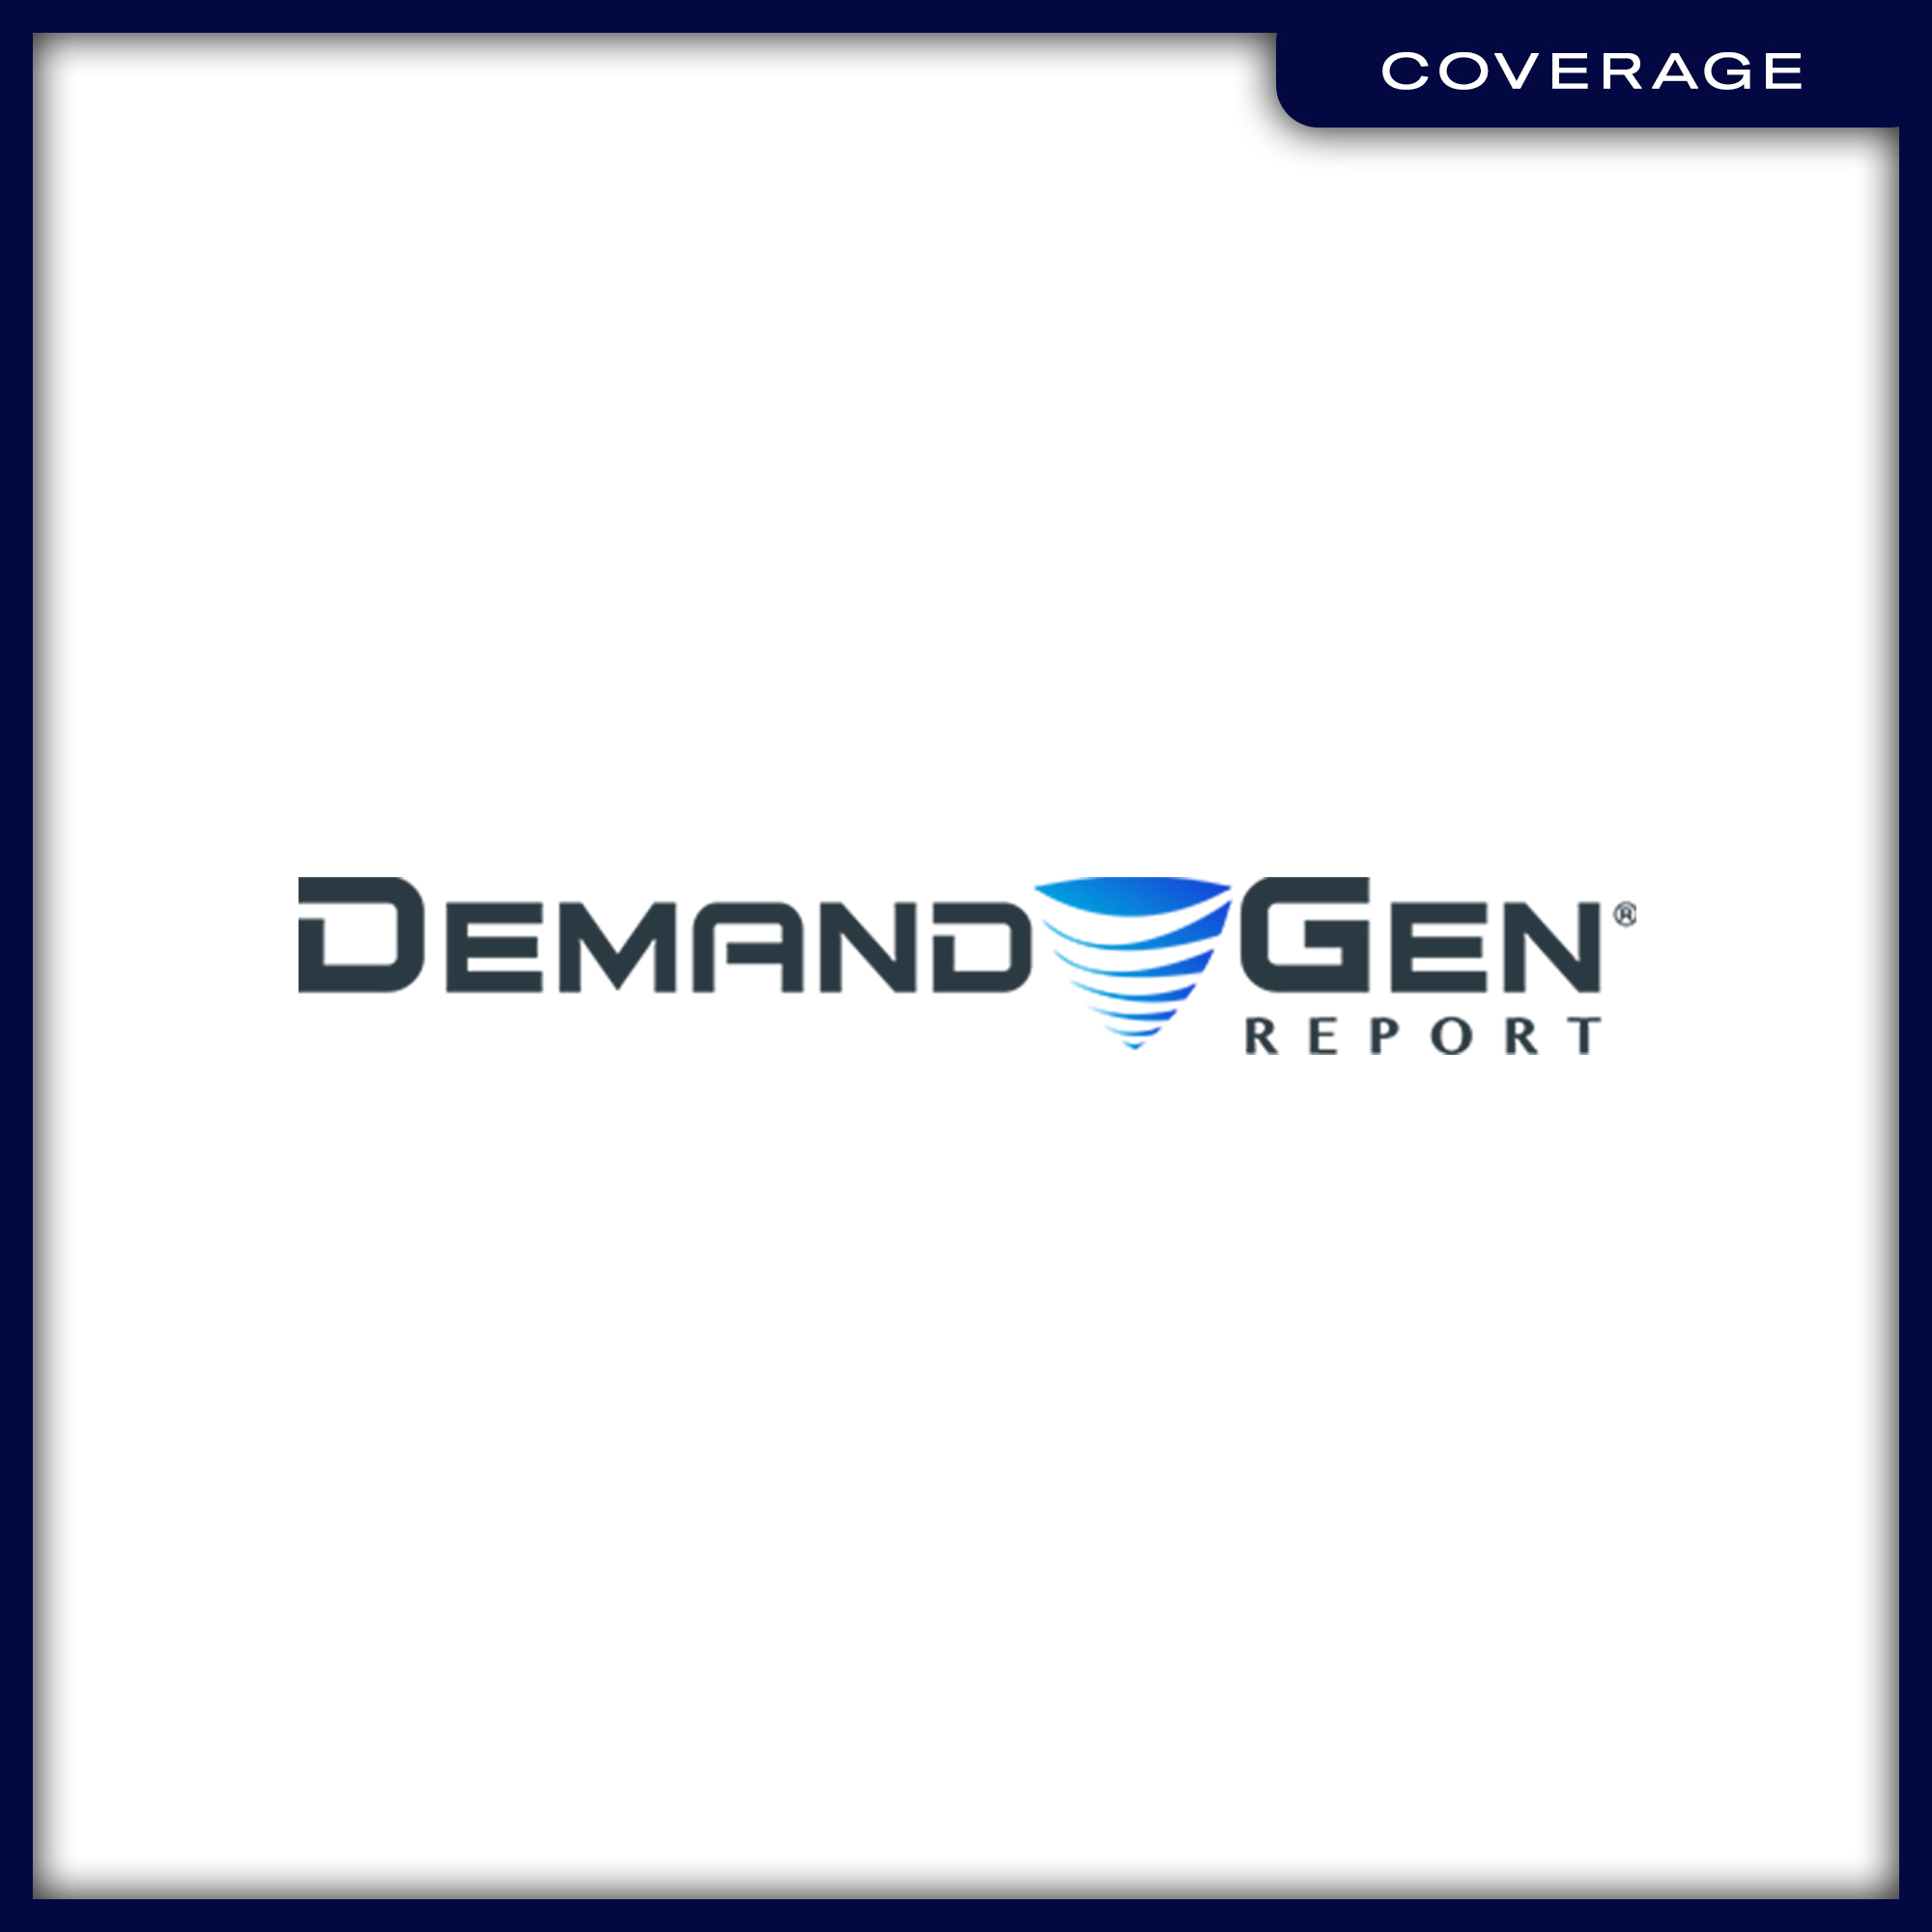 17-Coverage--Demand-Gen-Report--Casted-Aims-to-Empower-Marketers-to-Develop-Podcast-Content